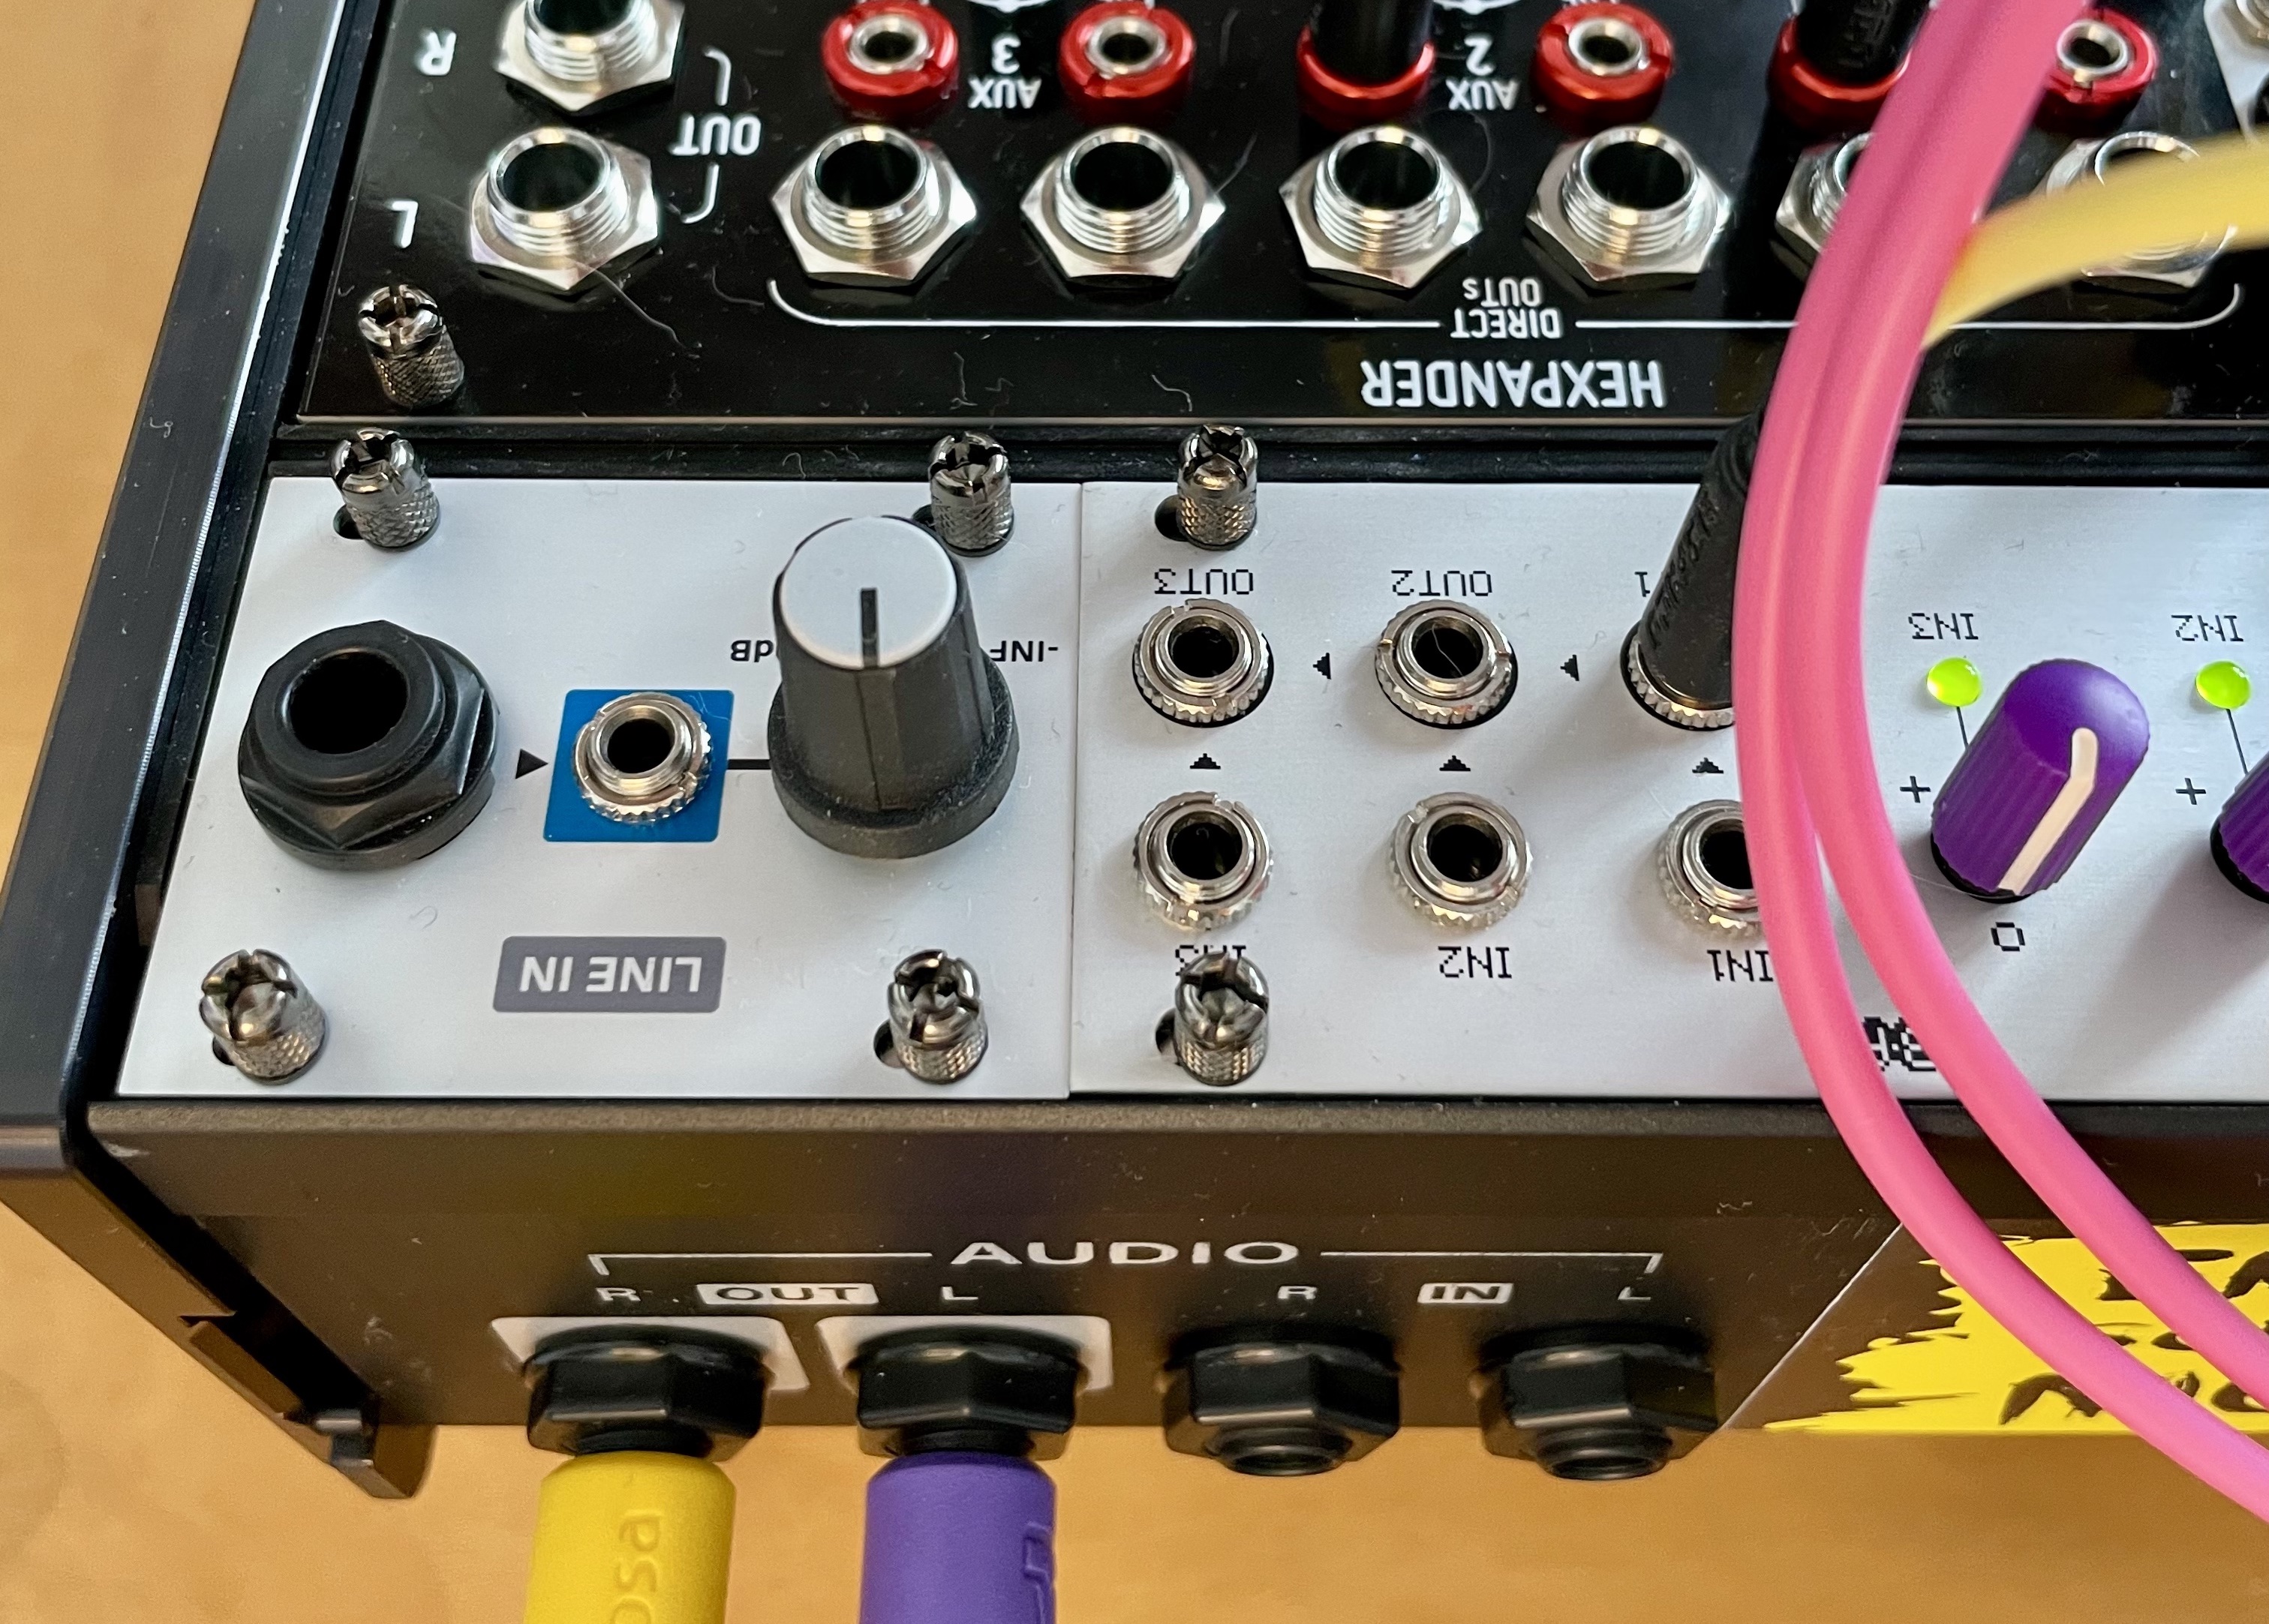 The rear of an Intellijel case with cables plugged into the audio out jacks. Mounted in the case is a Befaco HEXMIX (HEXPANDER) and hair of my cats.